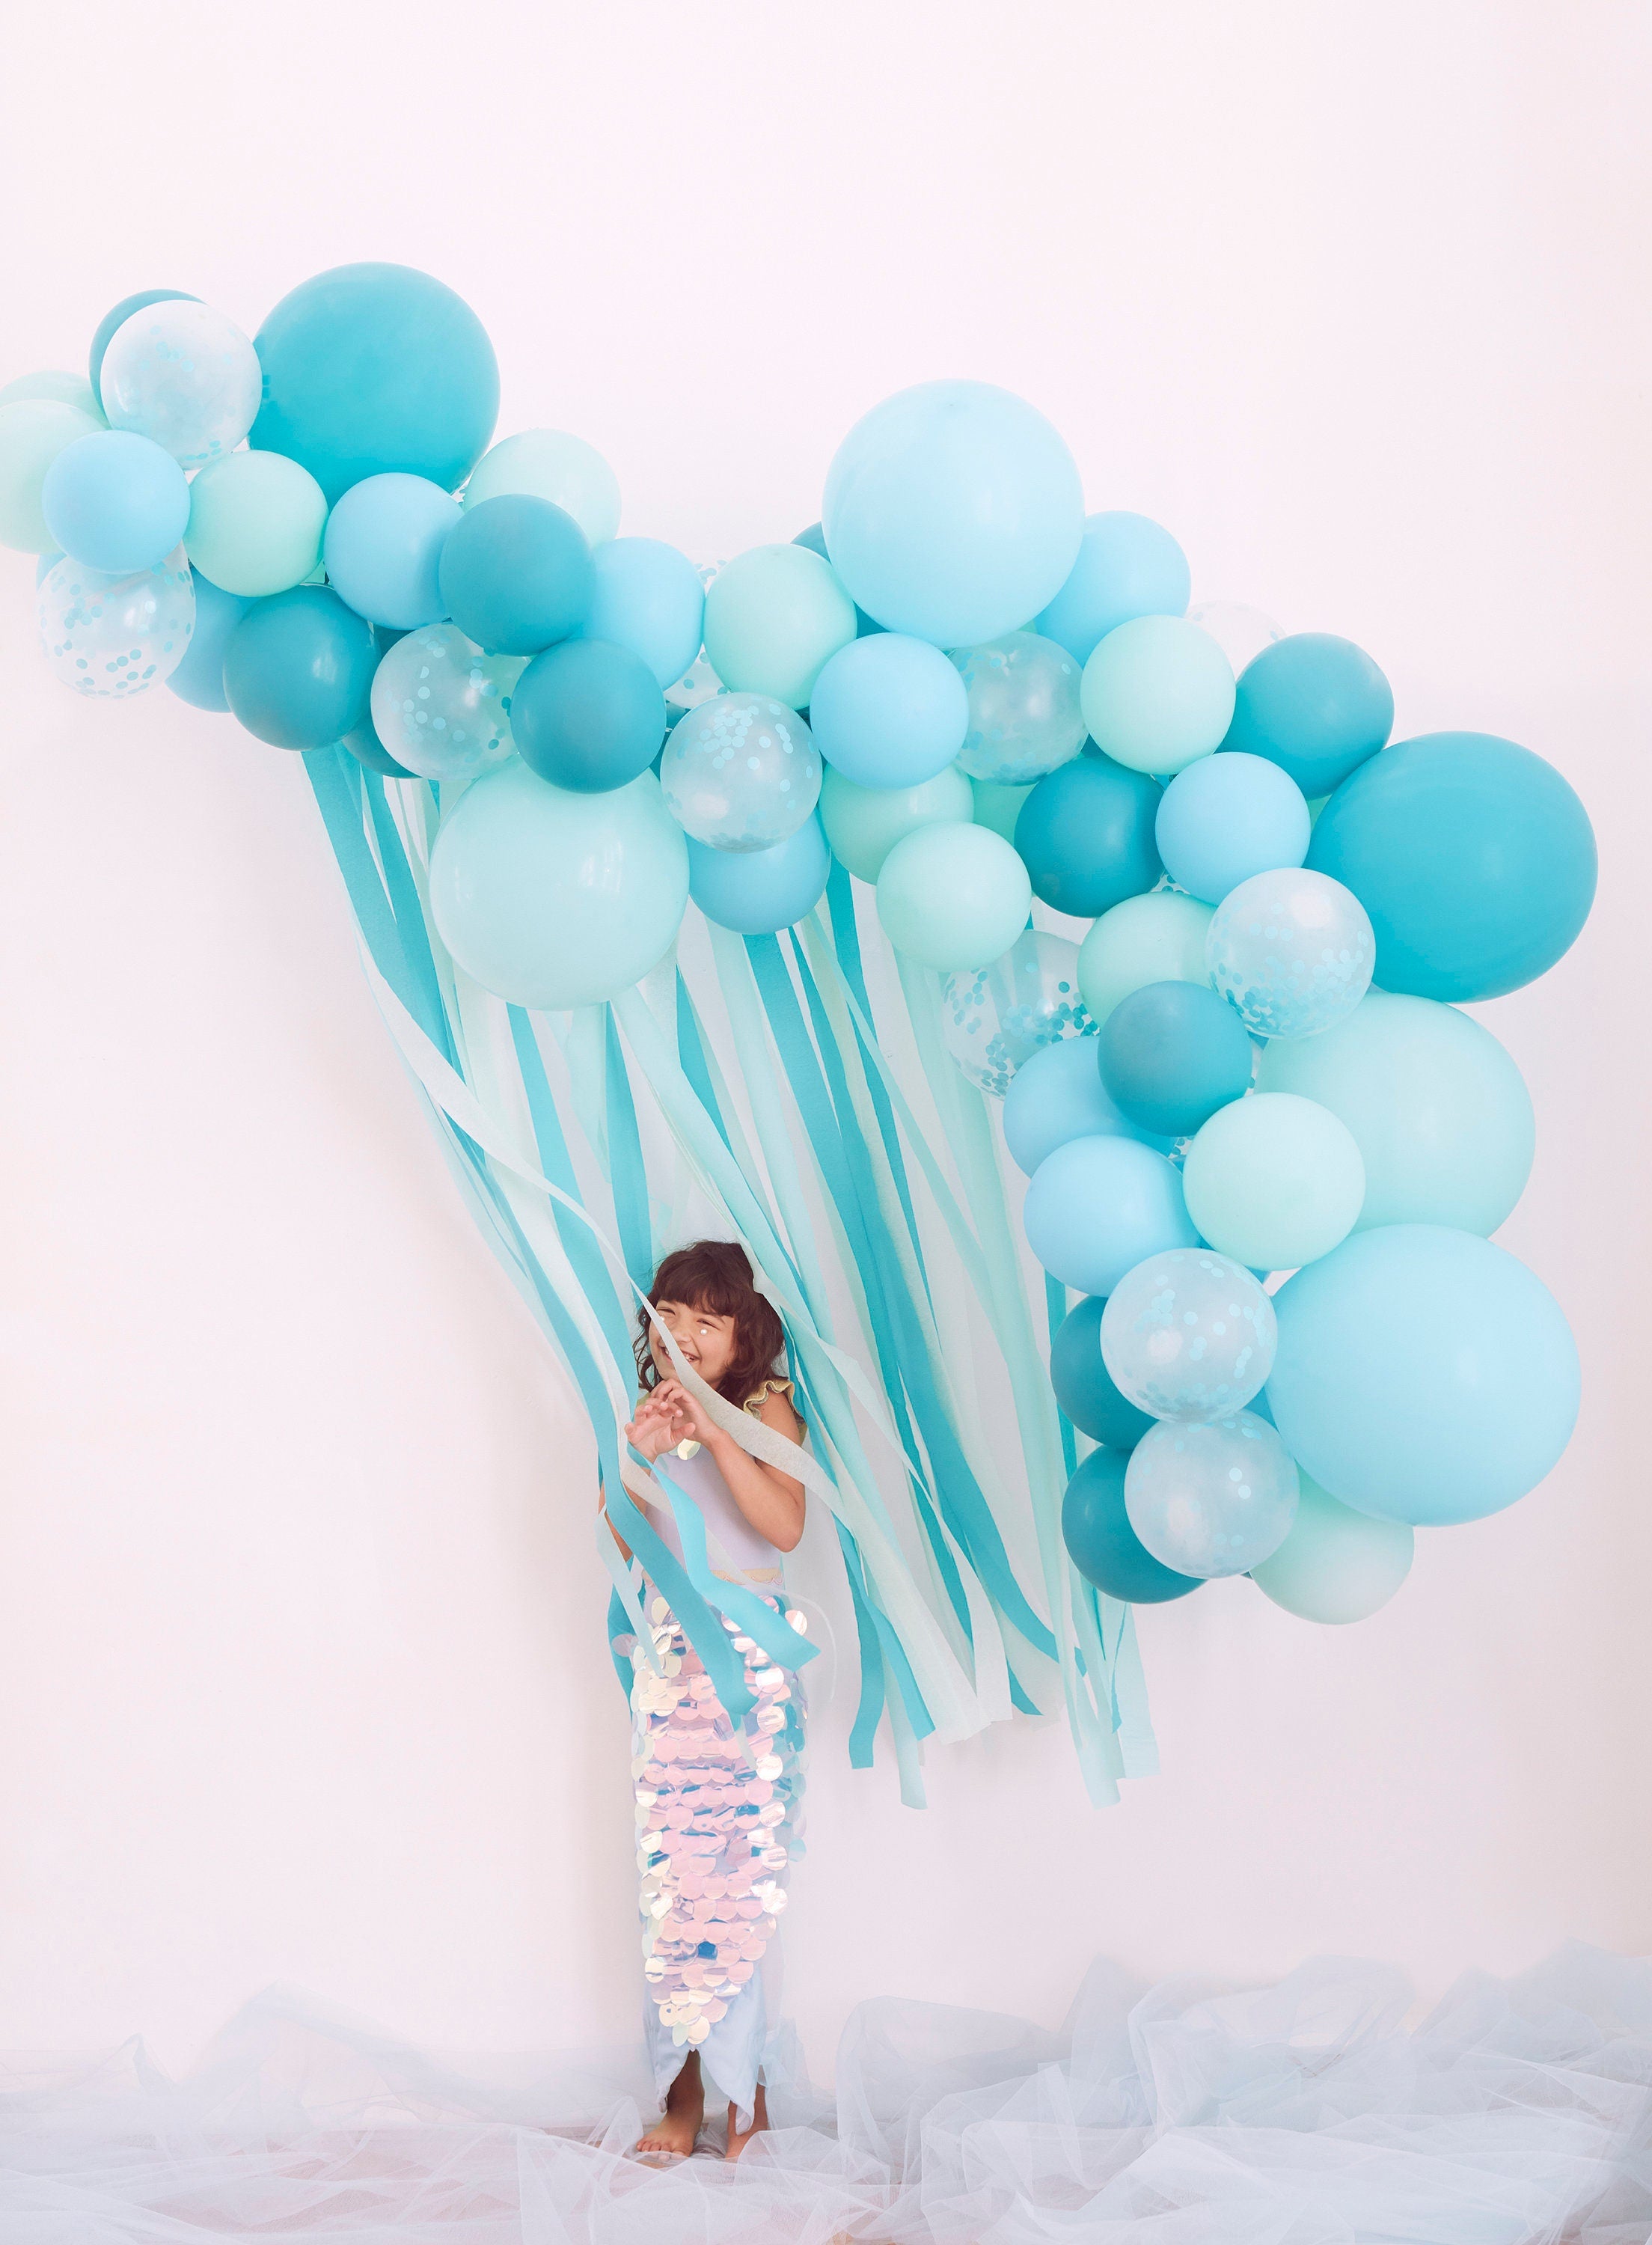 Mermaid Garland | Mermaid Party Decoration - Mermaid Backdrop - Mermaid Party - Mermaid Birthday Decoration - Under the Sea Party Decoration